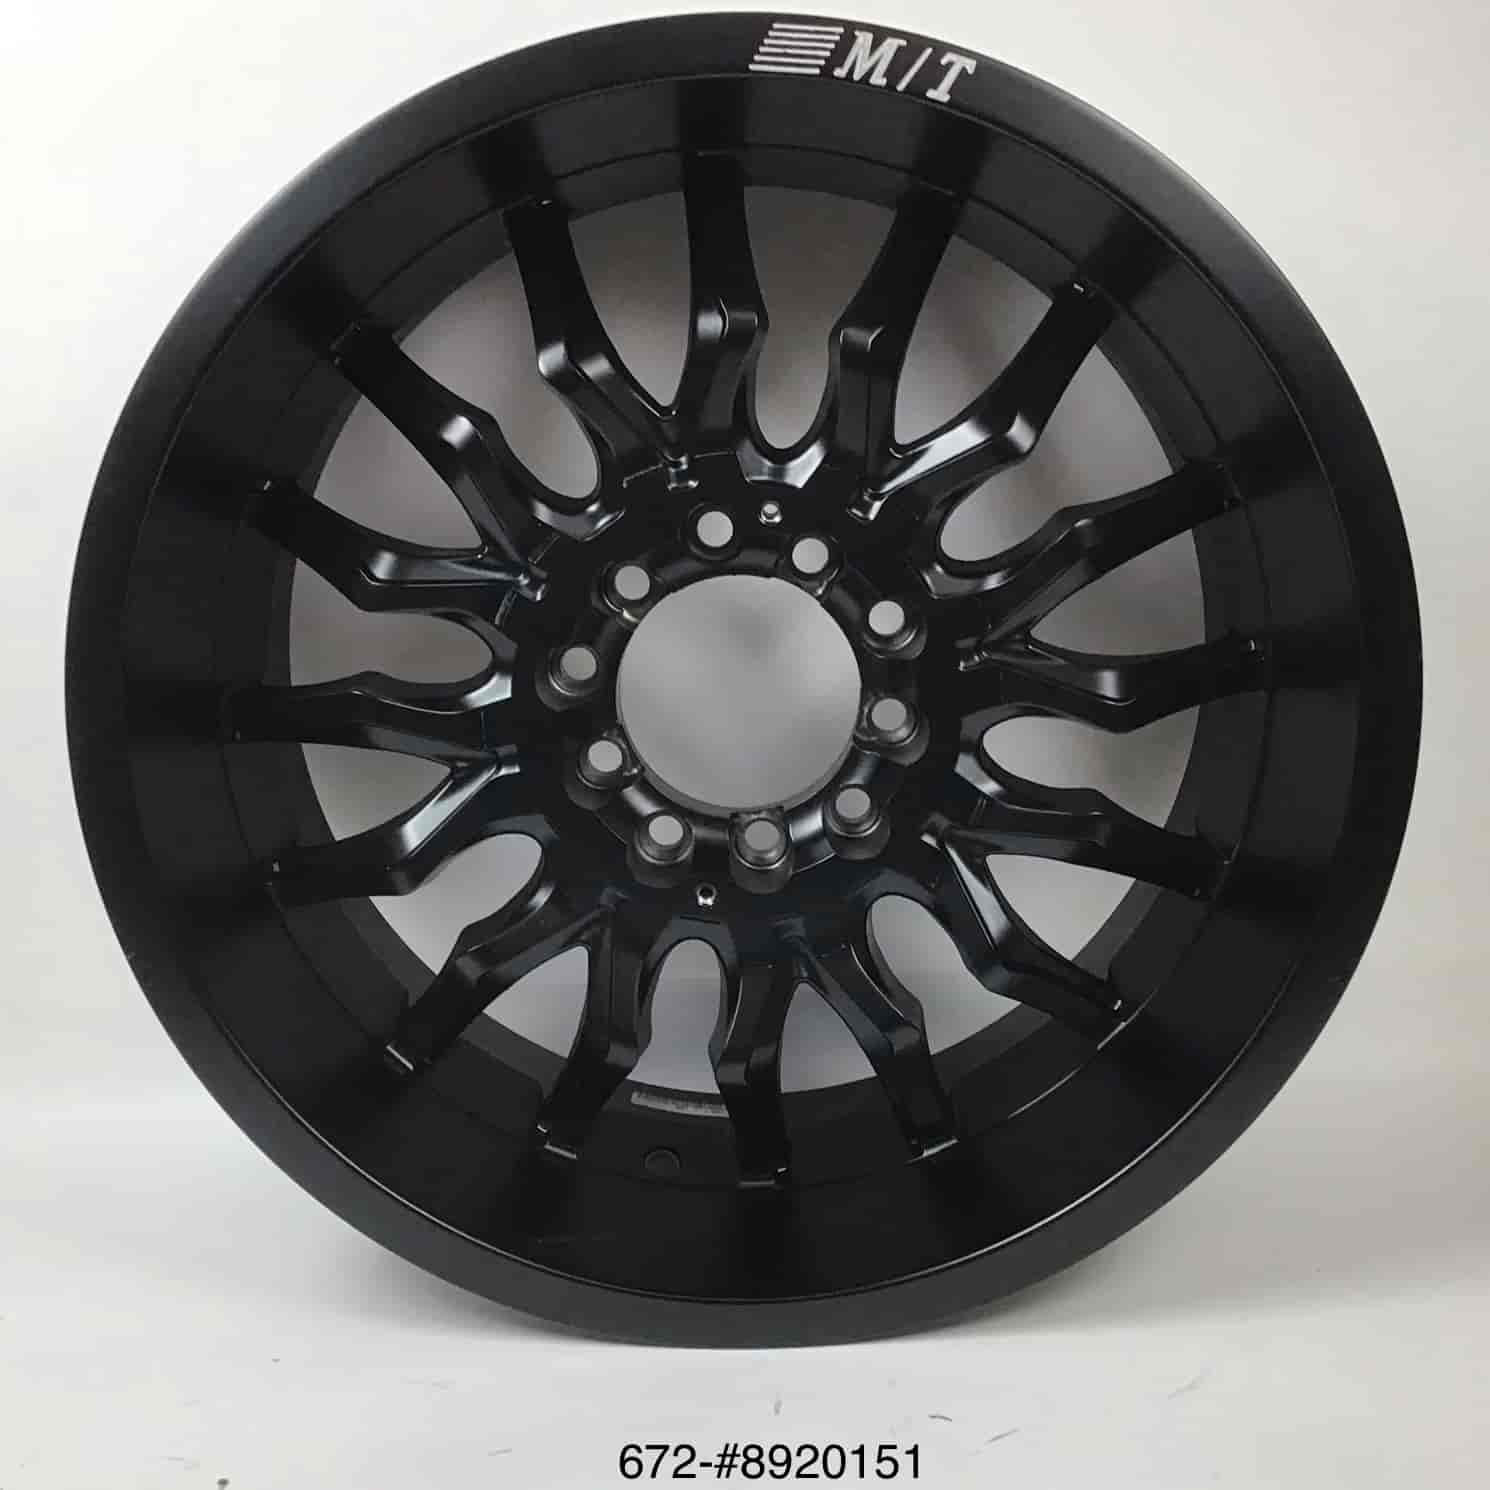 *BLEMISHED* Metal Series MM-489 Wheel Size: 20" x 9"